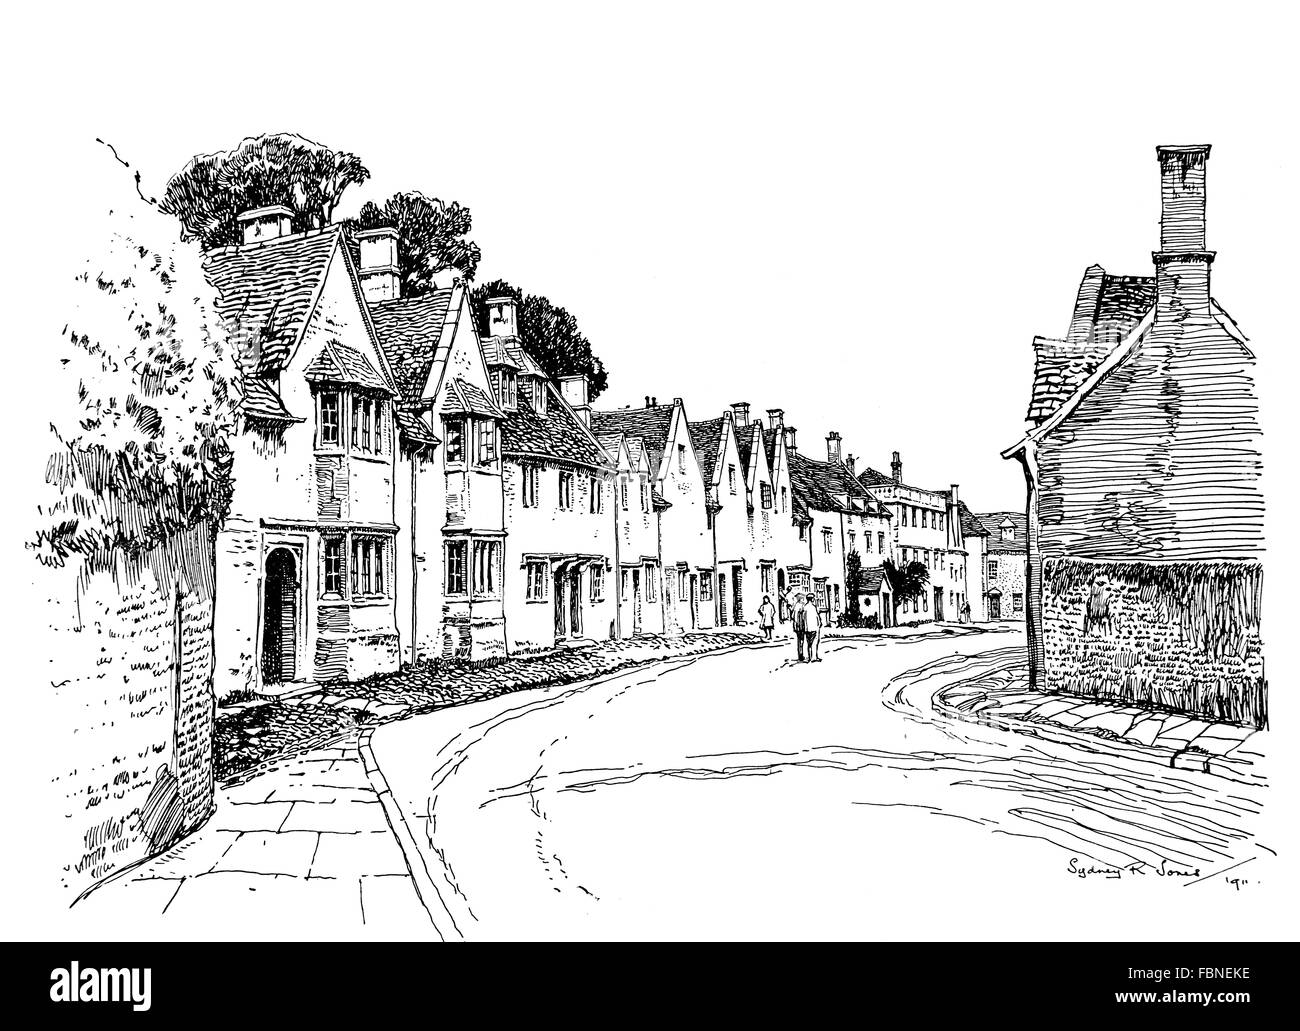 UK, England, Wiltshire, Corsham, old houses in High Street, 1911 line illustration by, Sydney R Jones, from The Studio Magazine Stock Photo